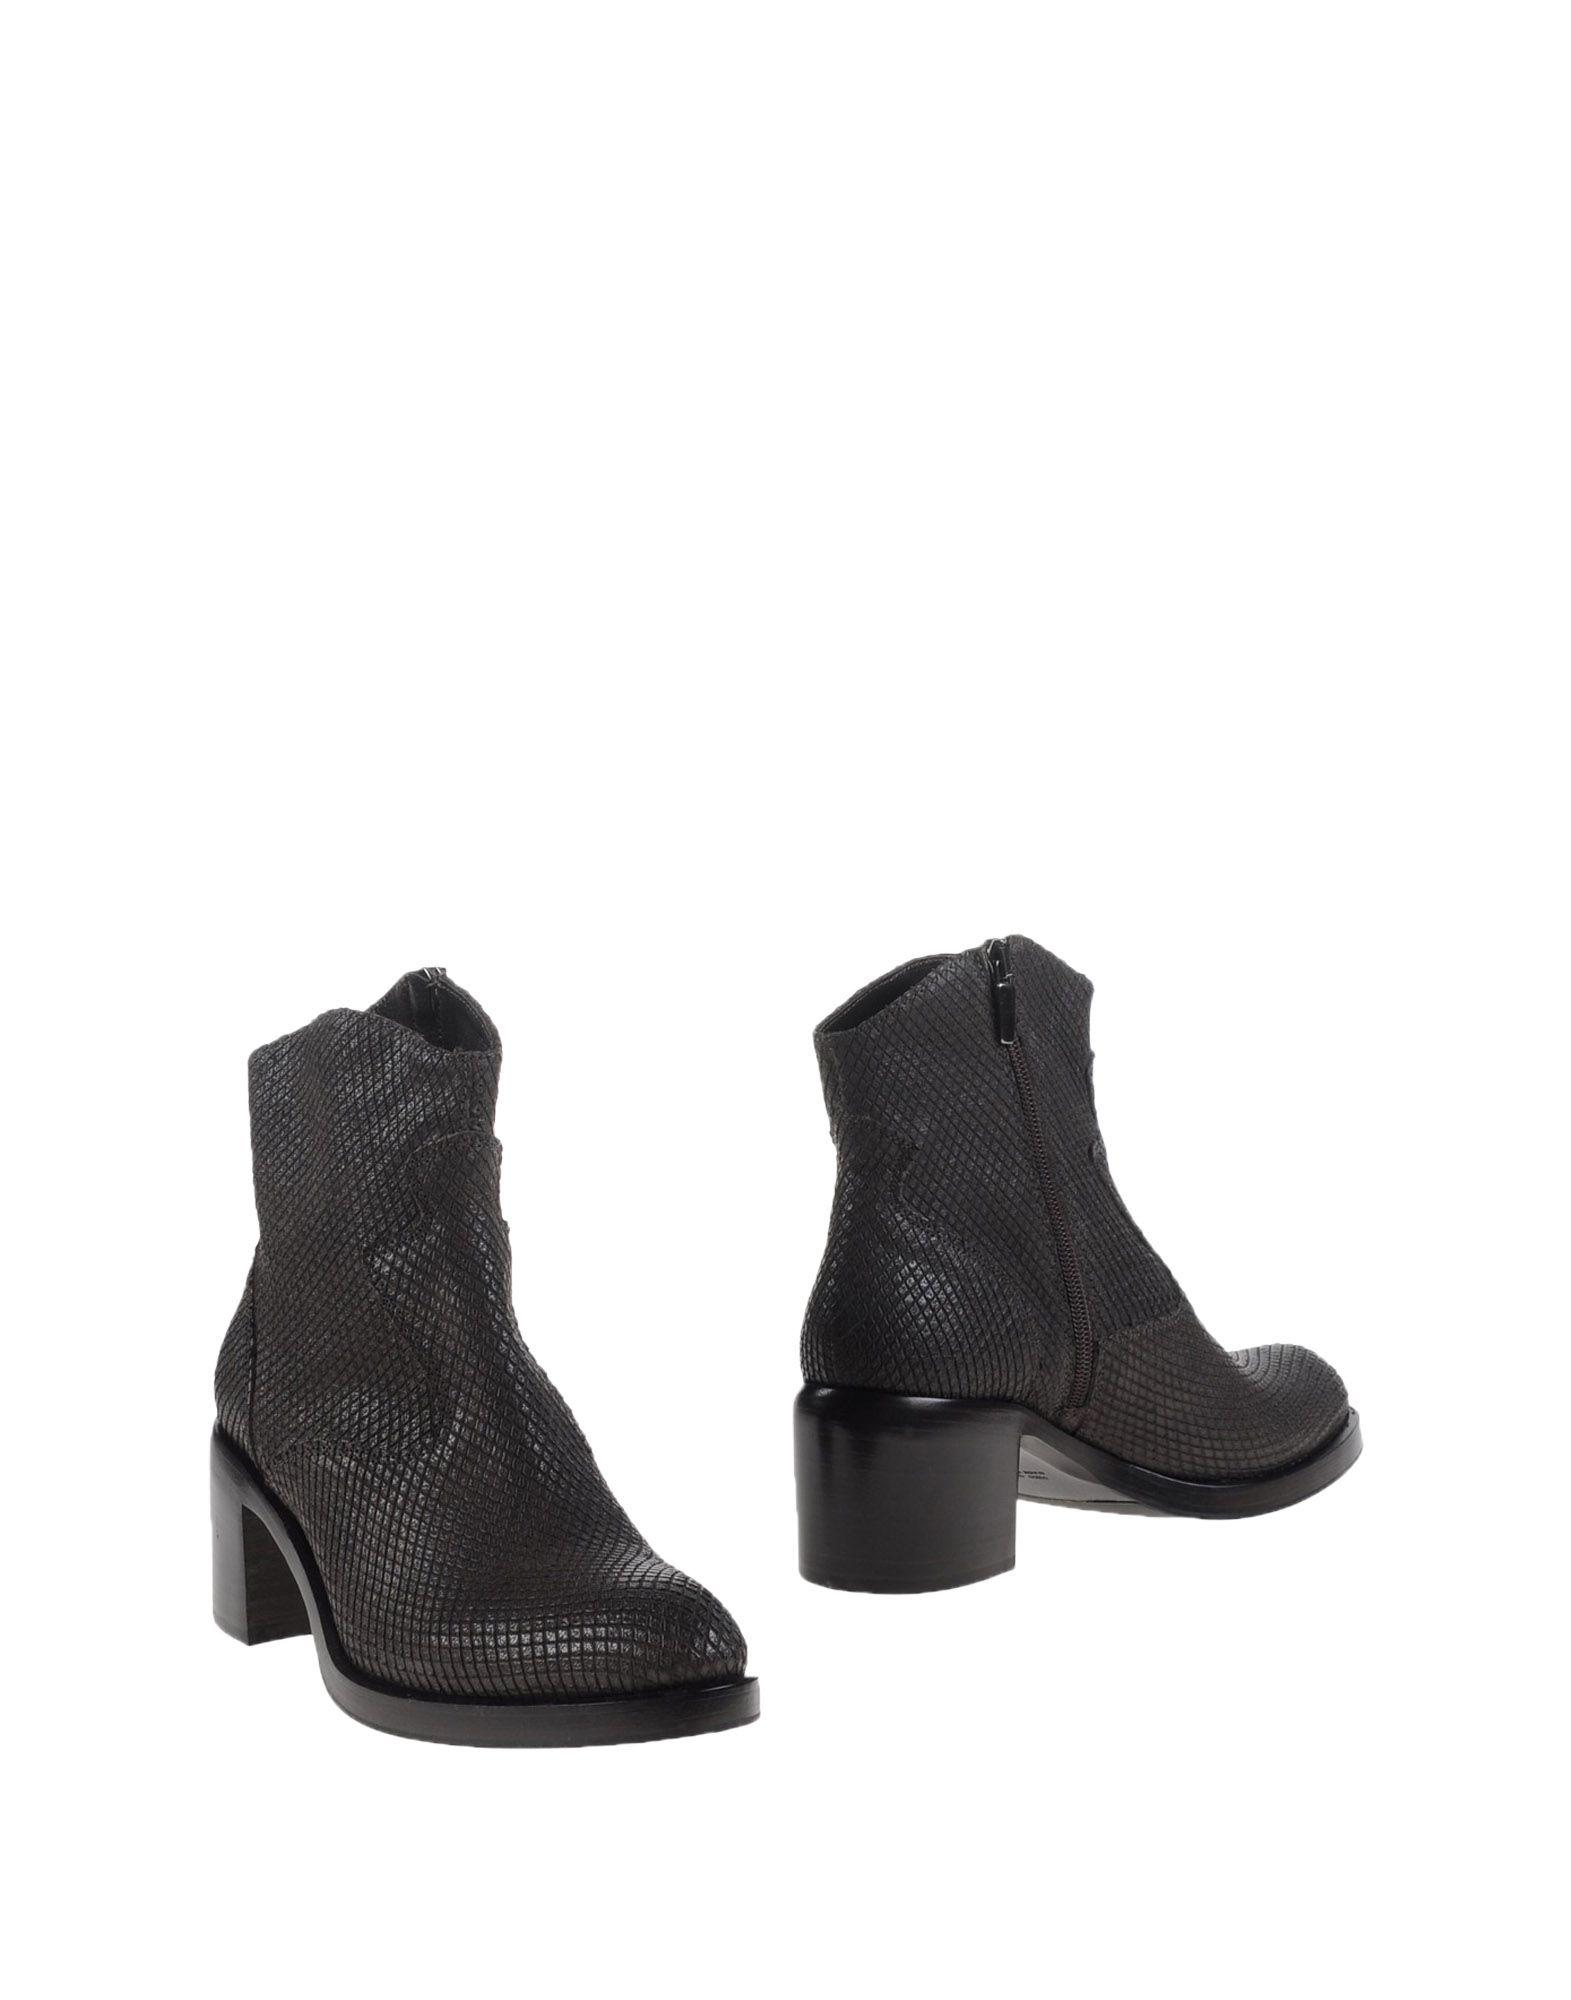 Lyst - Laura Bellariva Ankle Boots in Gray